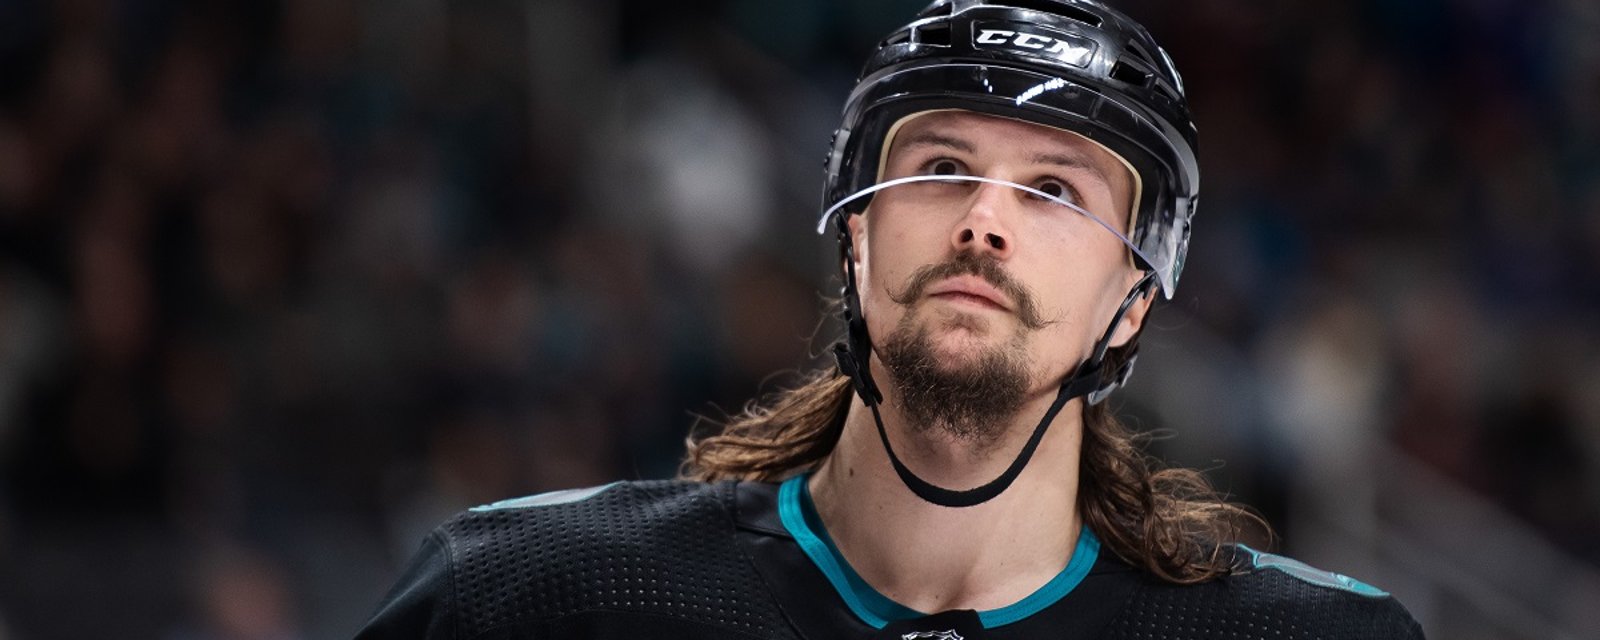 Erik Karlsson trade may be turning into a steal for the Senators.